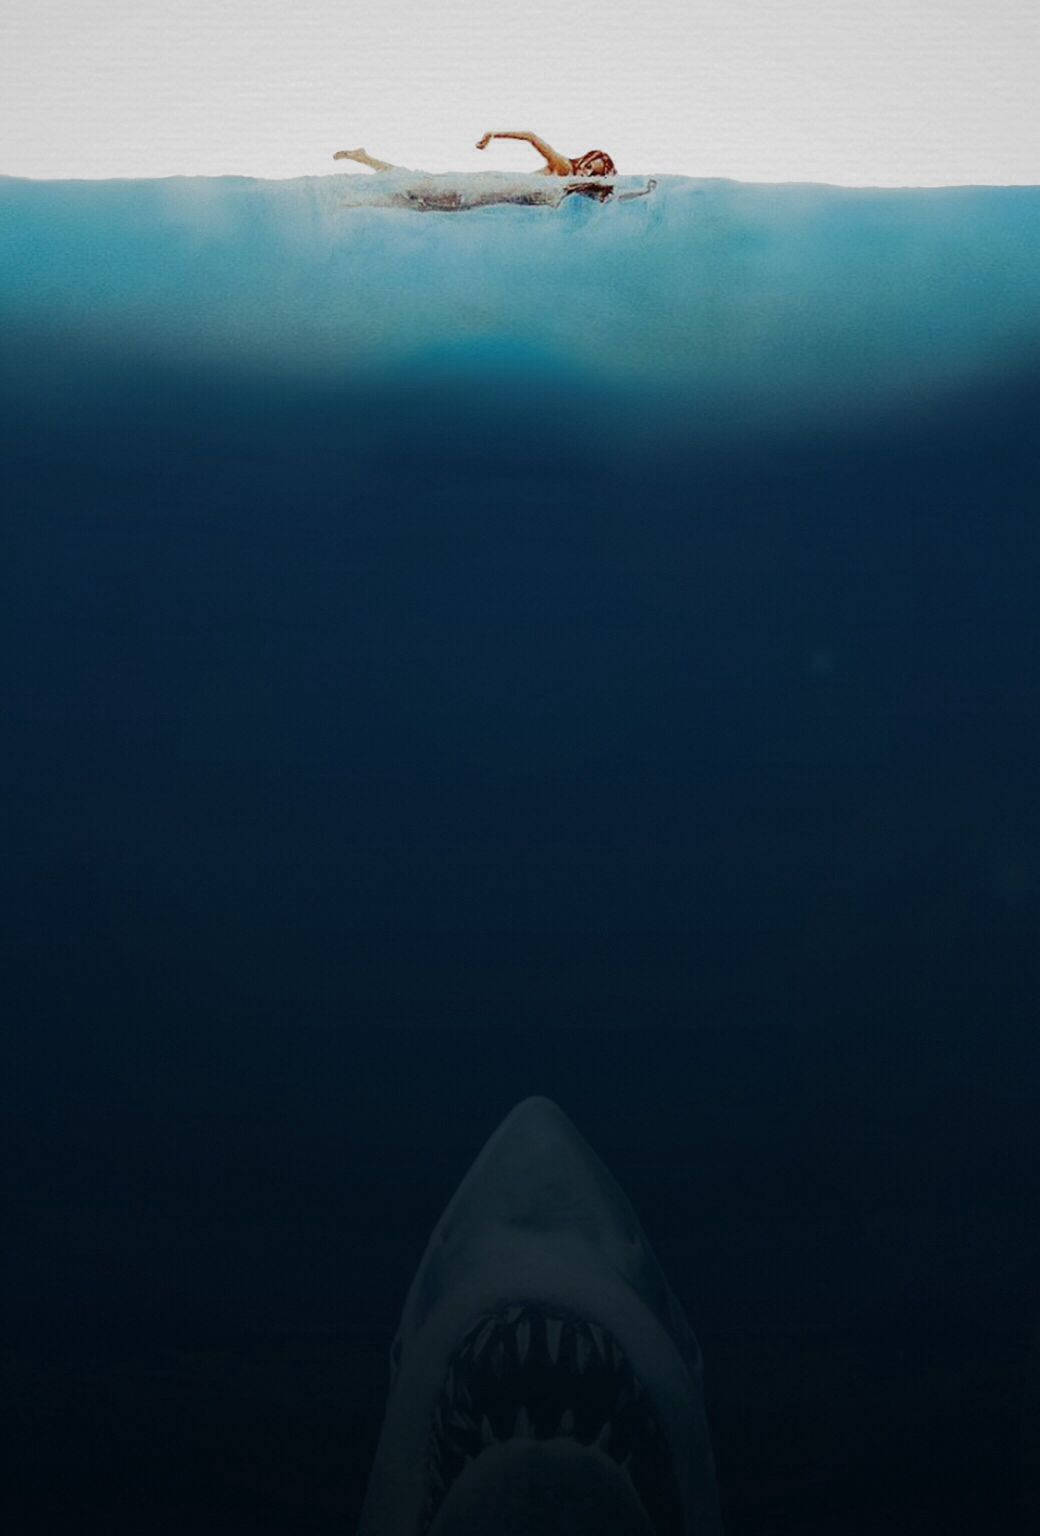 Classic Jaws Poster Wallpaper